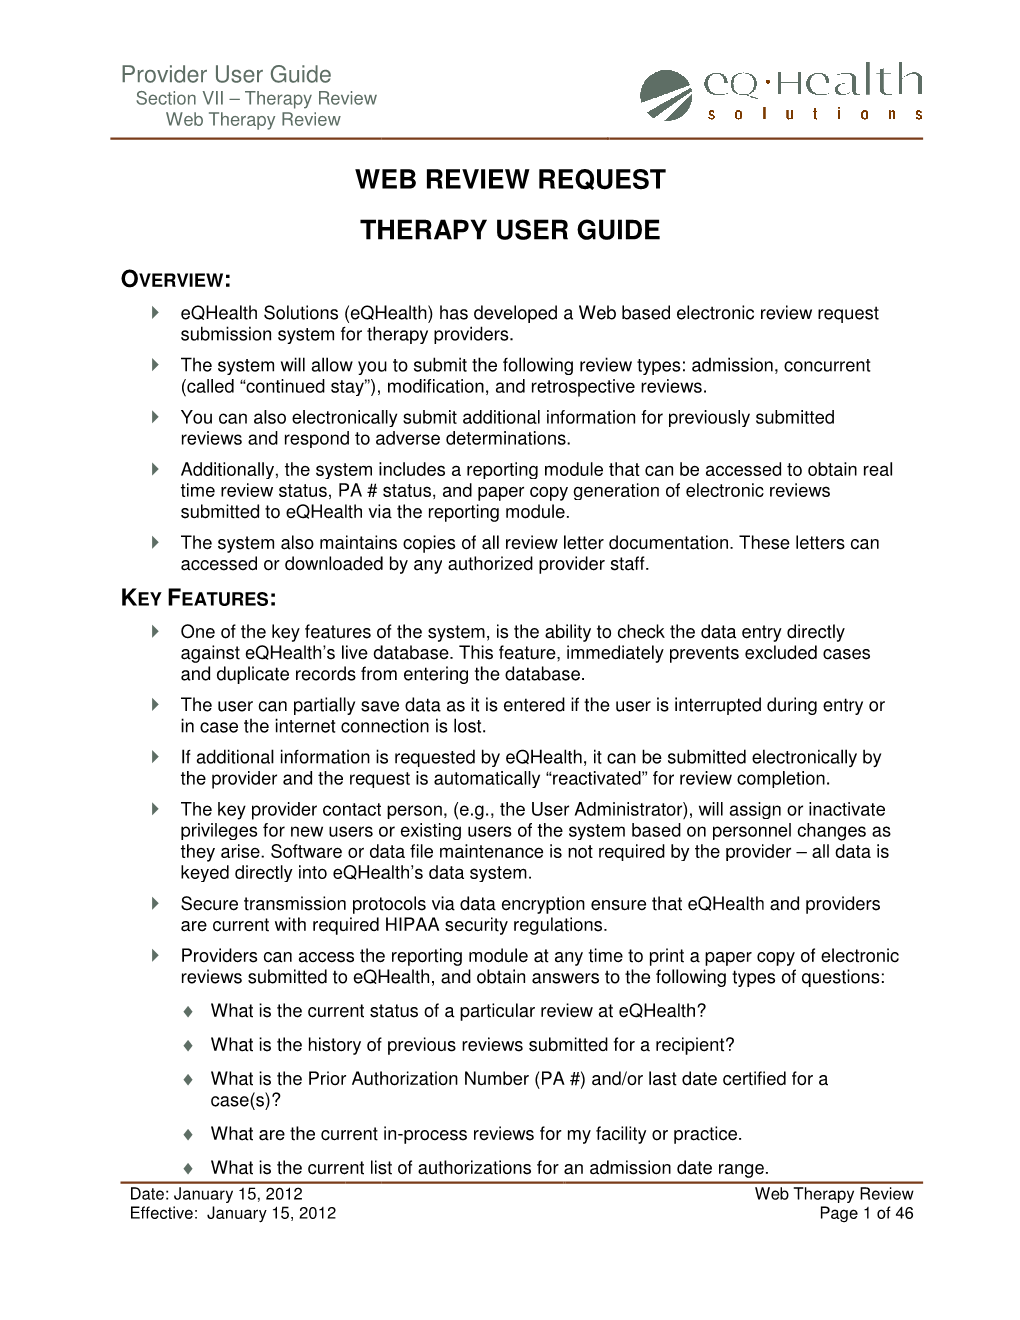 Web Review Request Therapy User Guide